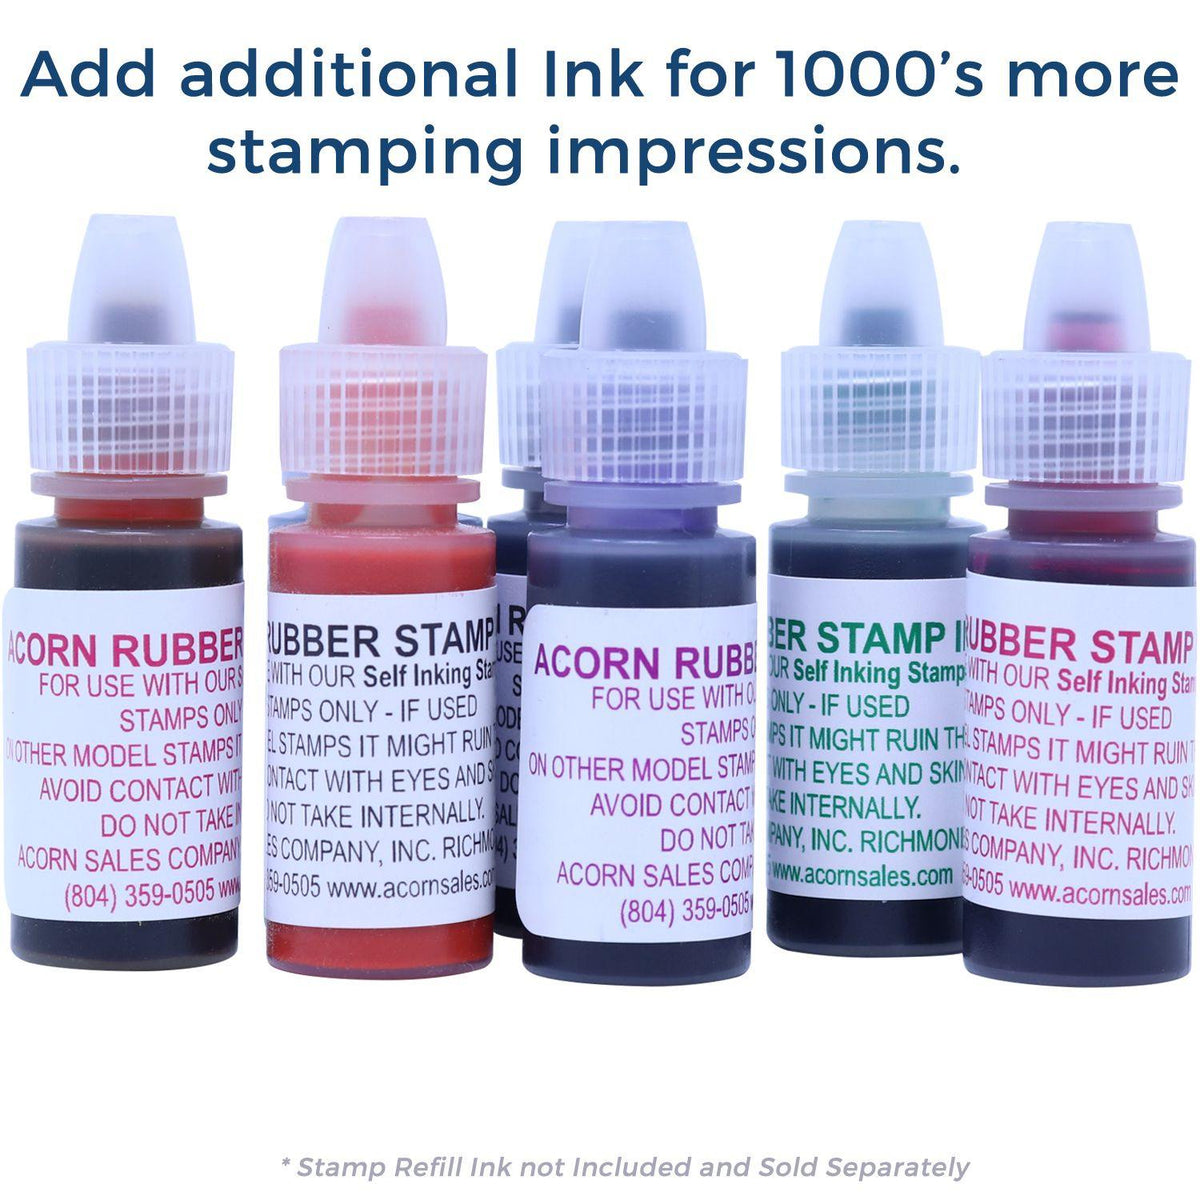 Refill Inks for Large Pre-Inked Narrow Font Original Stamp Available